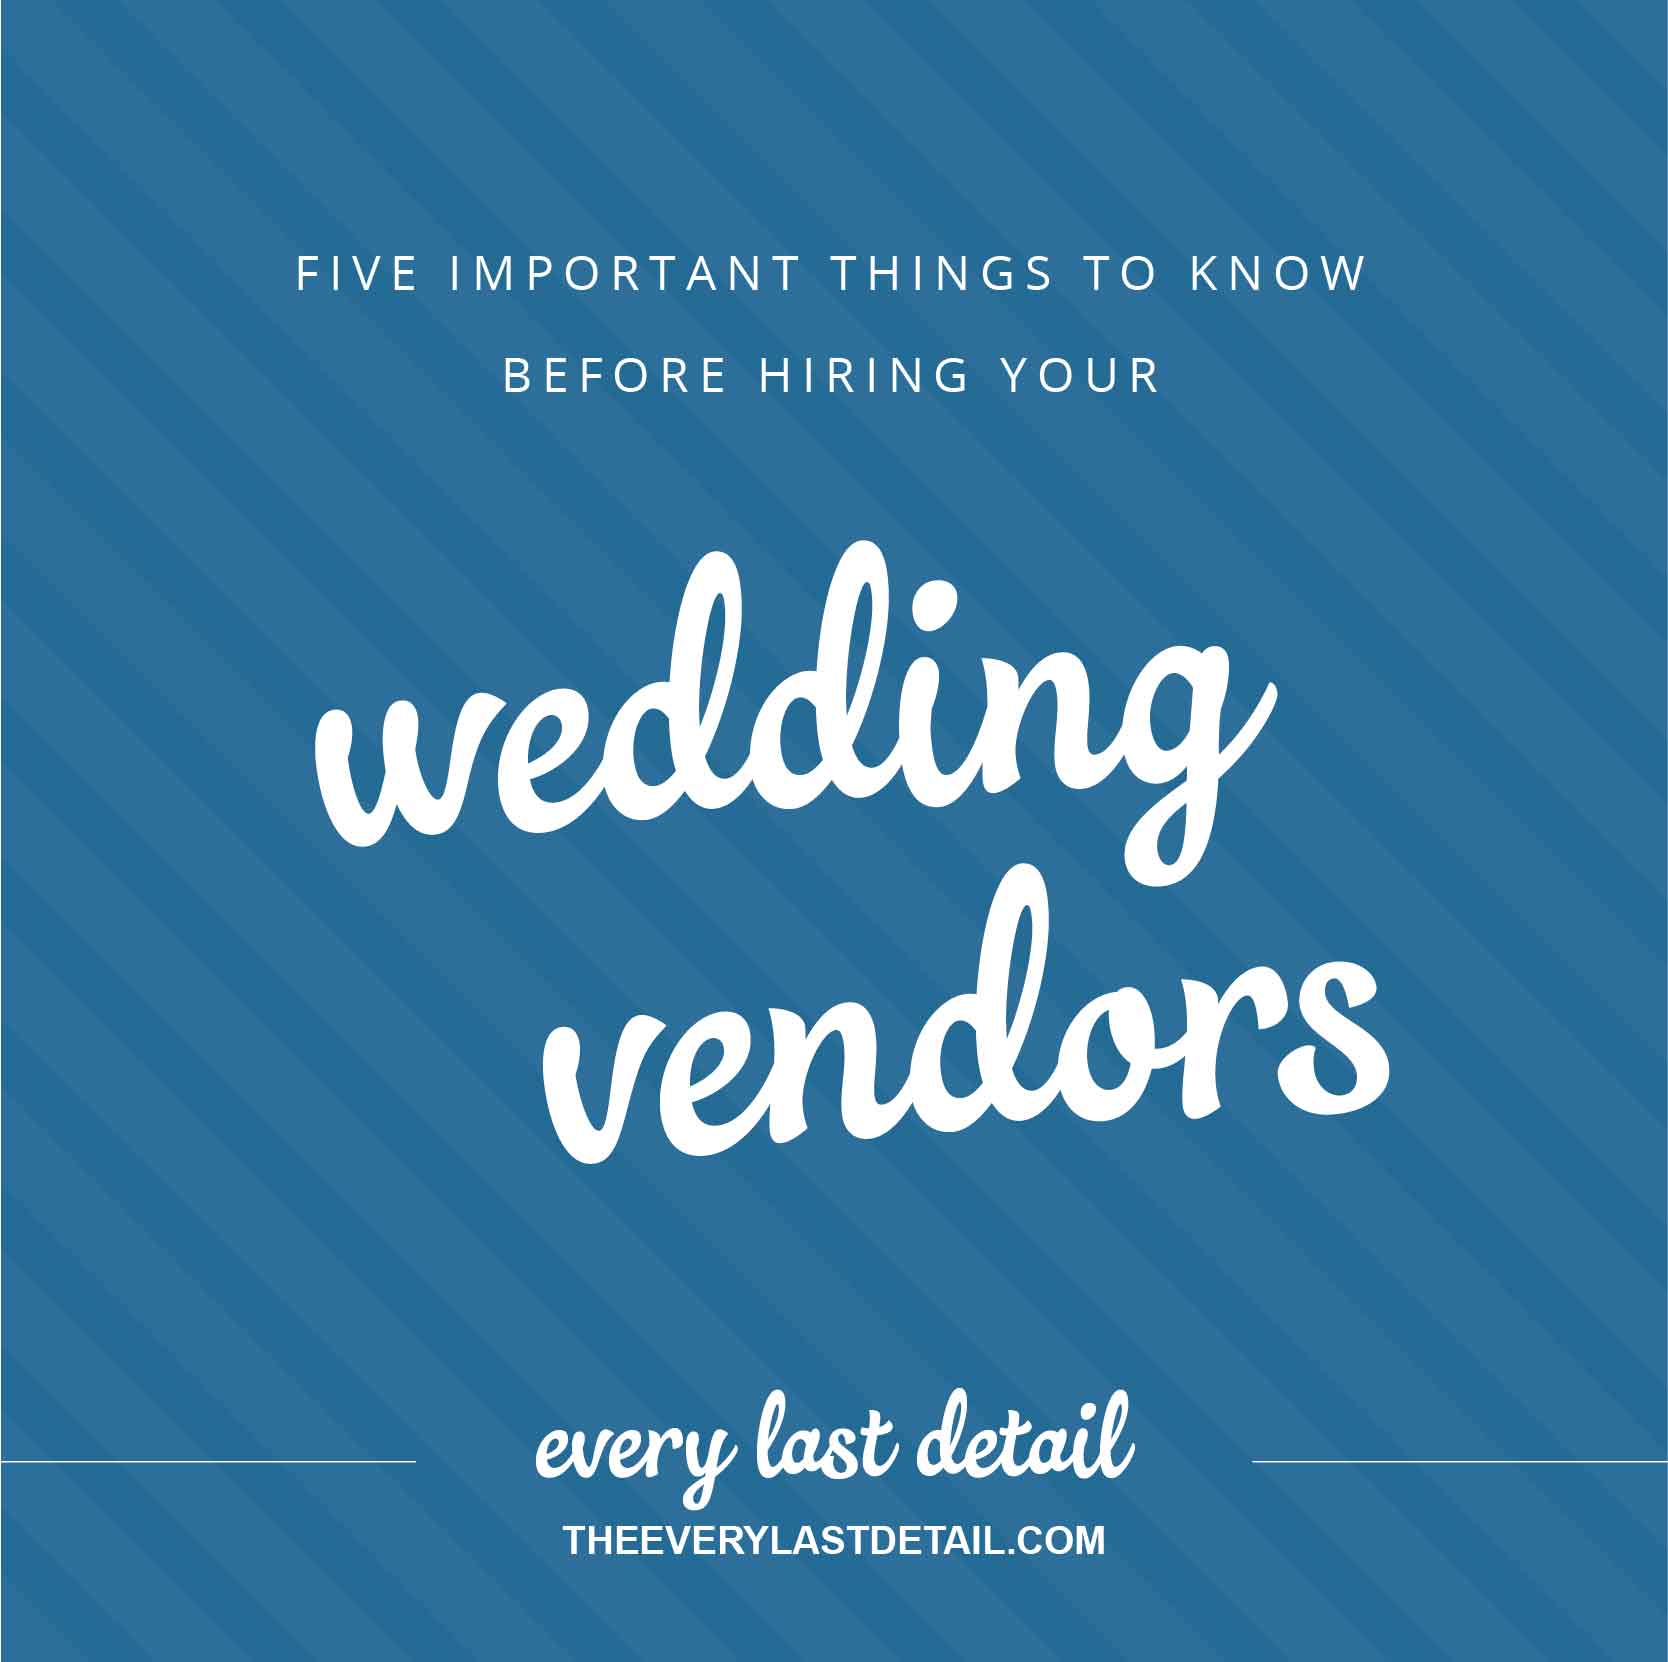 5 Important Things To Know Before Hiring Your Wedding Vendors via TheELD.com